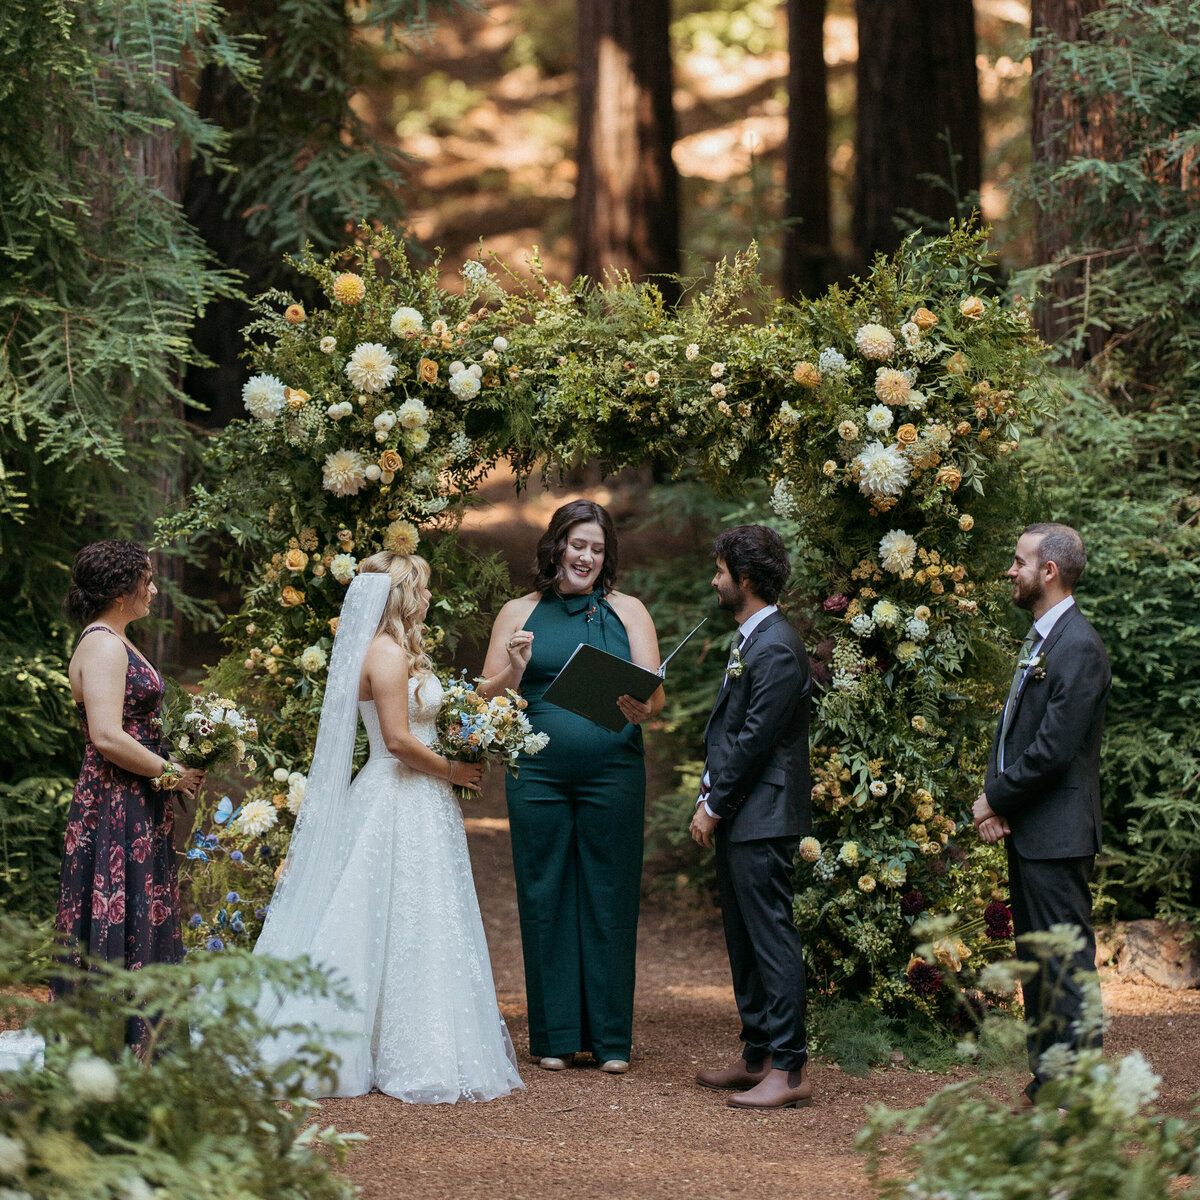 Intimate redwoods wedding ceremony in front of dramatic floral and foliage arch